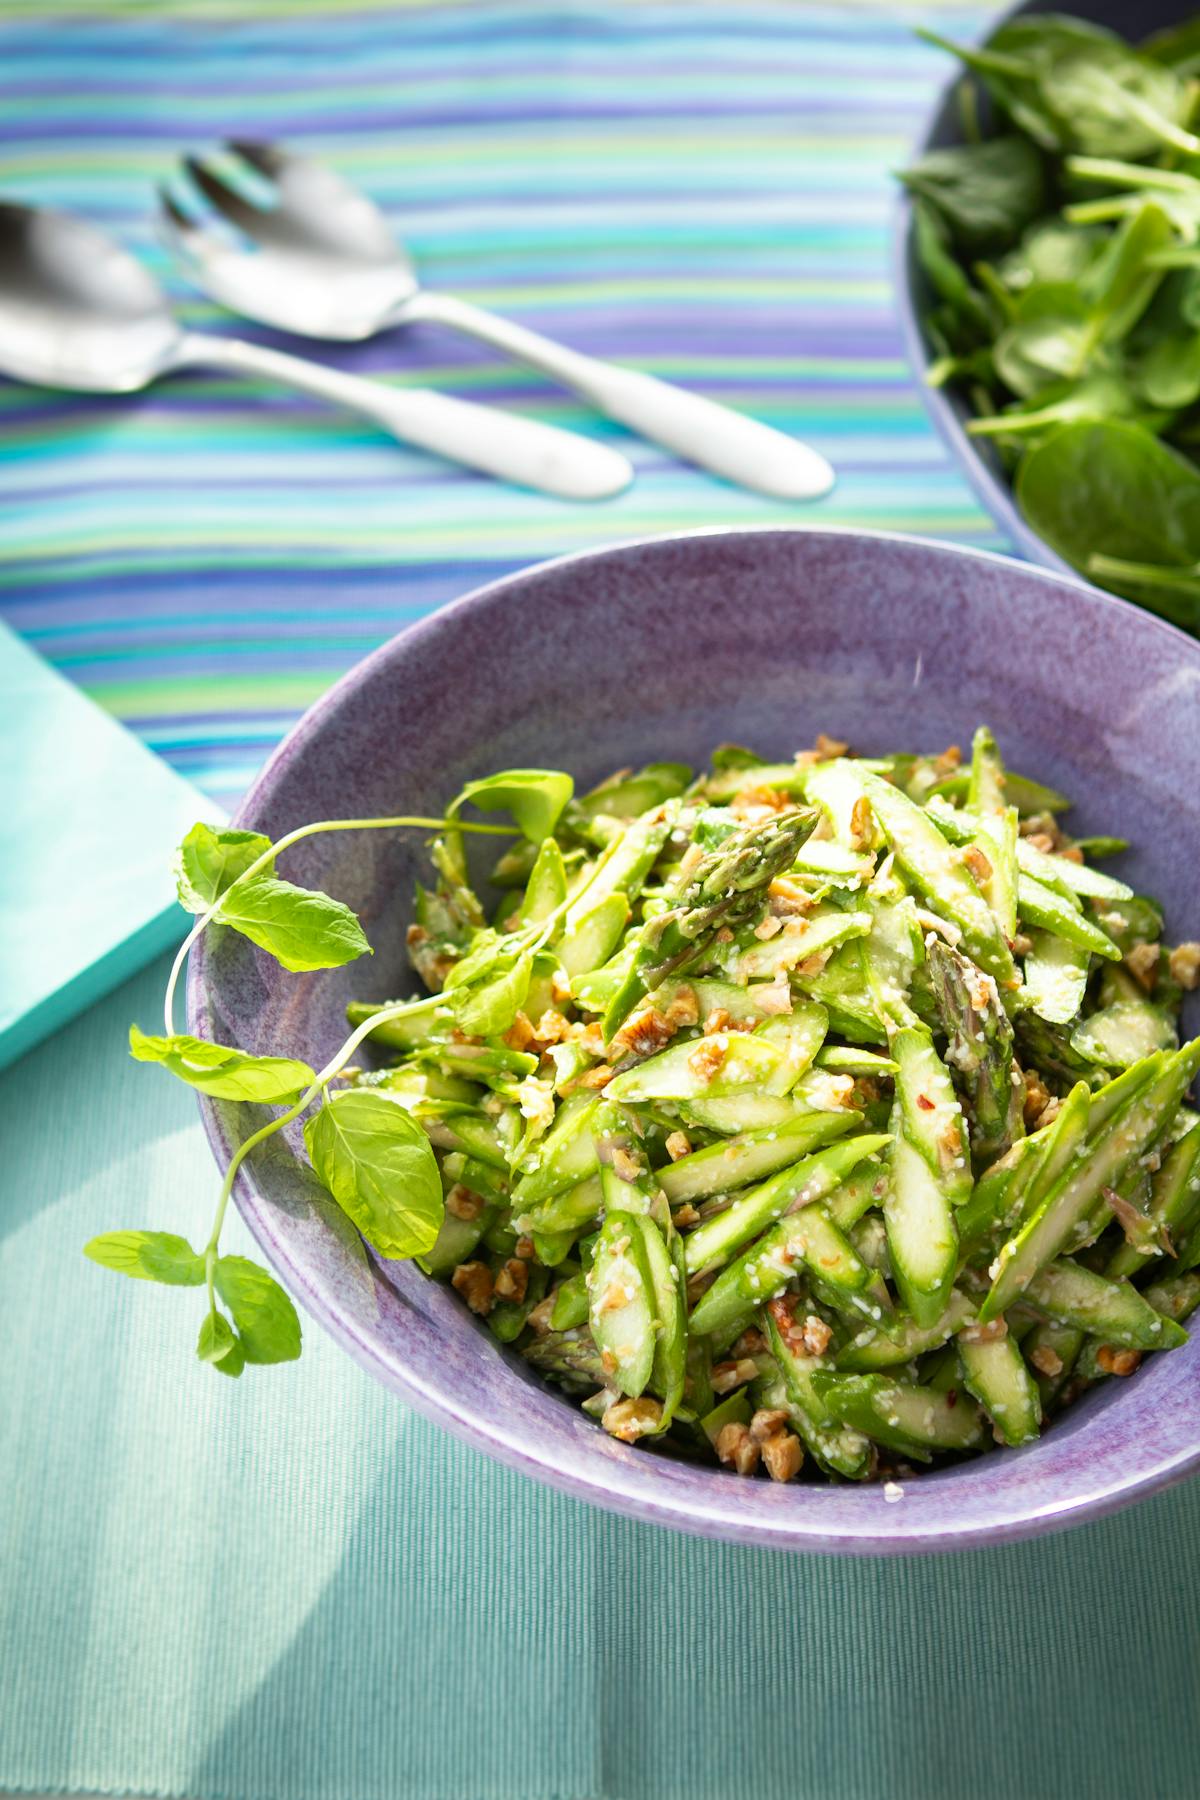 Low-carb asparagus salad with walnuts